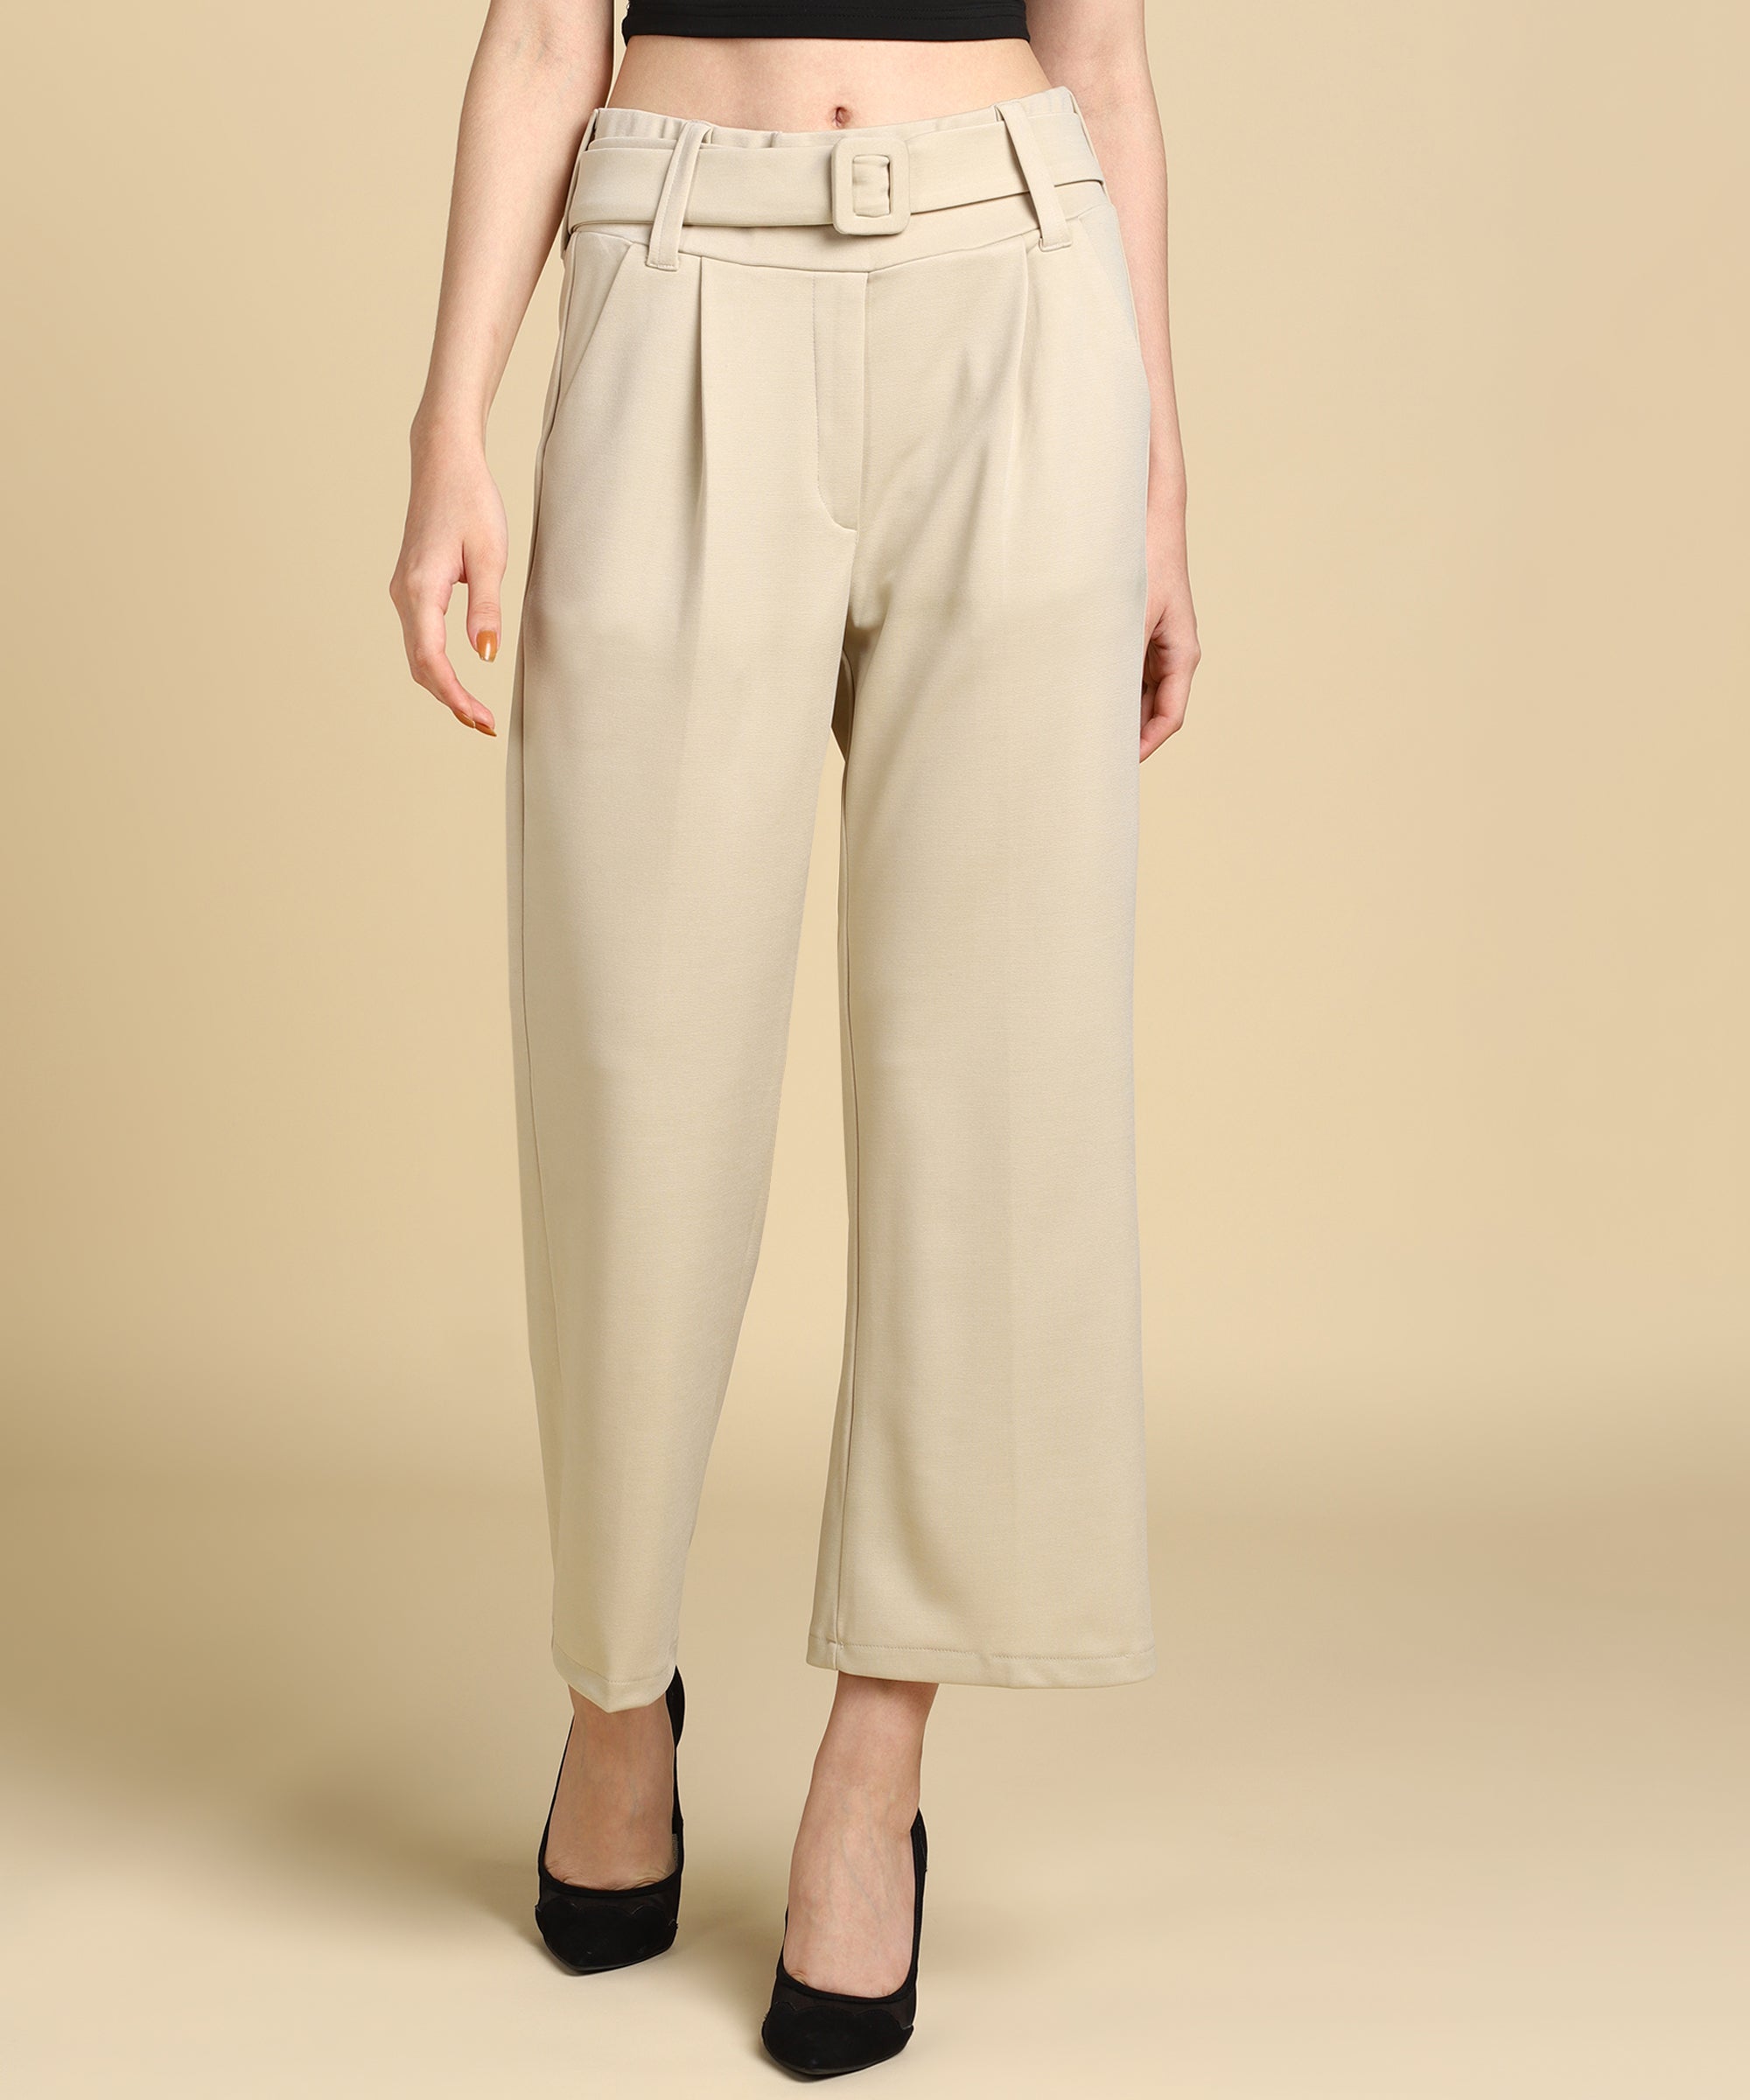 Gable Green Casual High-Waisted Parallel Cargo Trouser Pants for